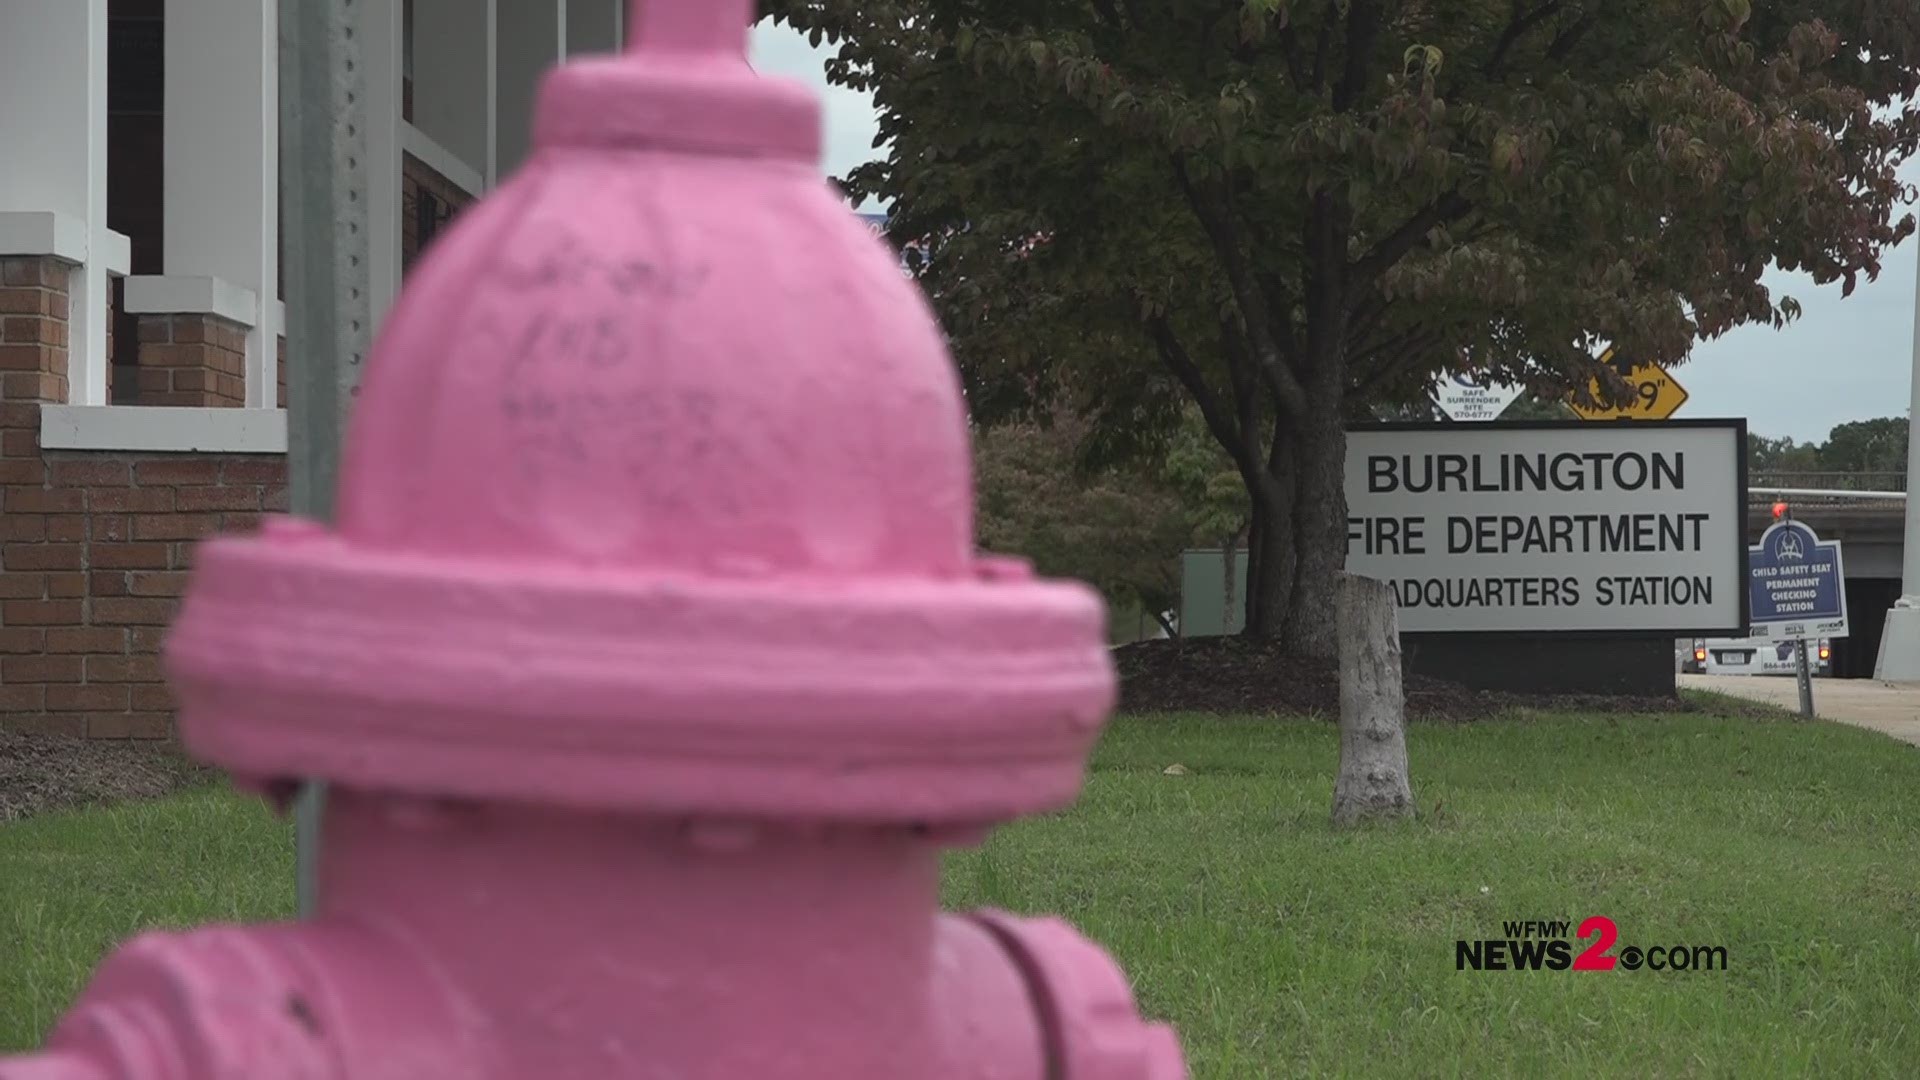 You can stop by their headquarters on South Church Street to sign the hydrant and write an inspiring message for those fighting breast cancer.